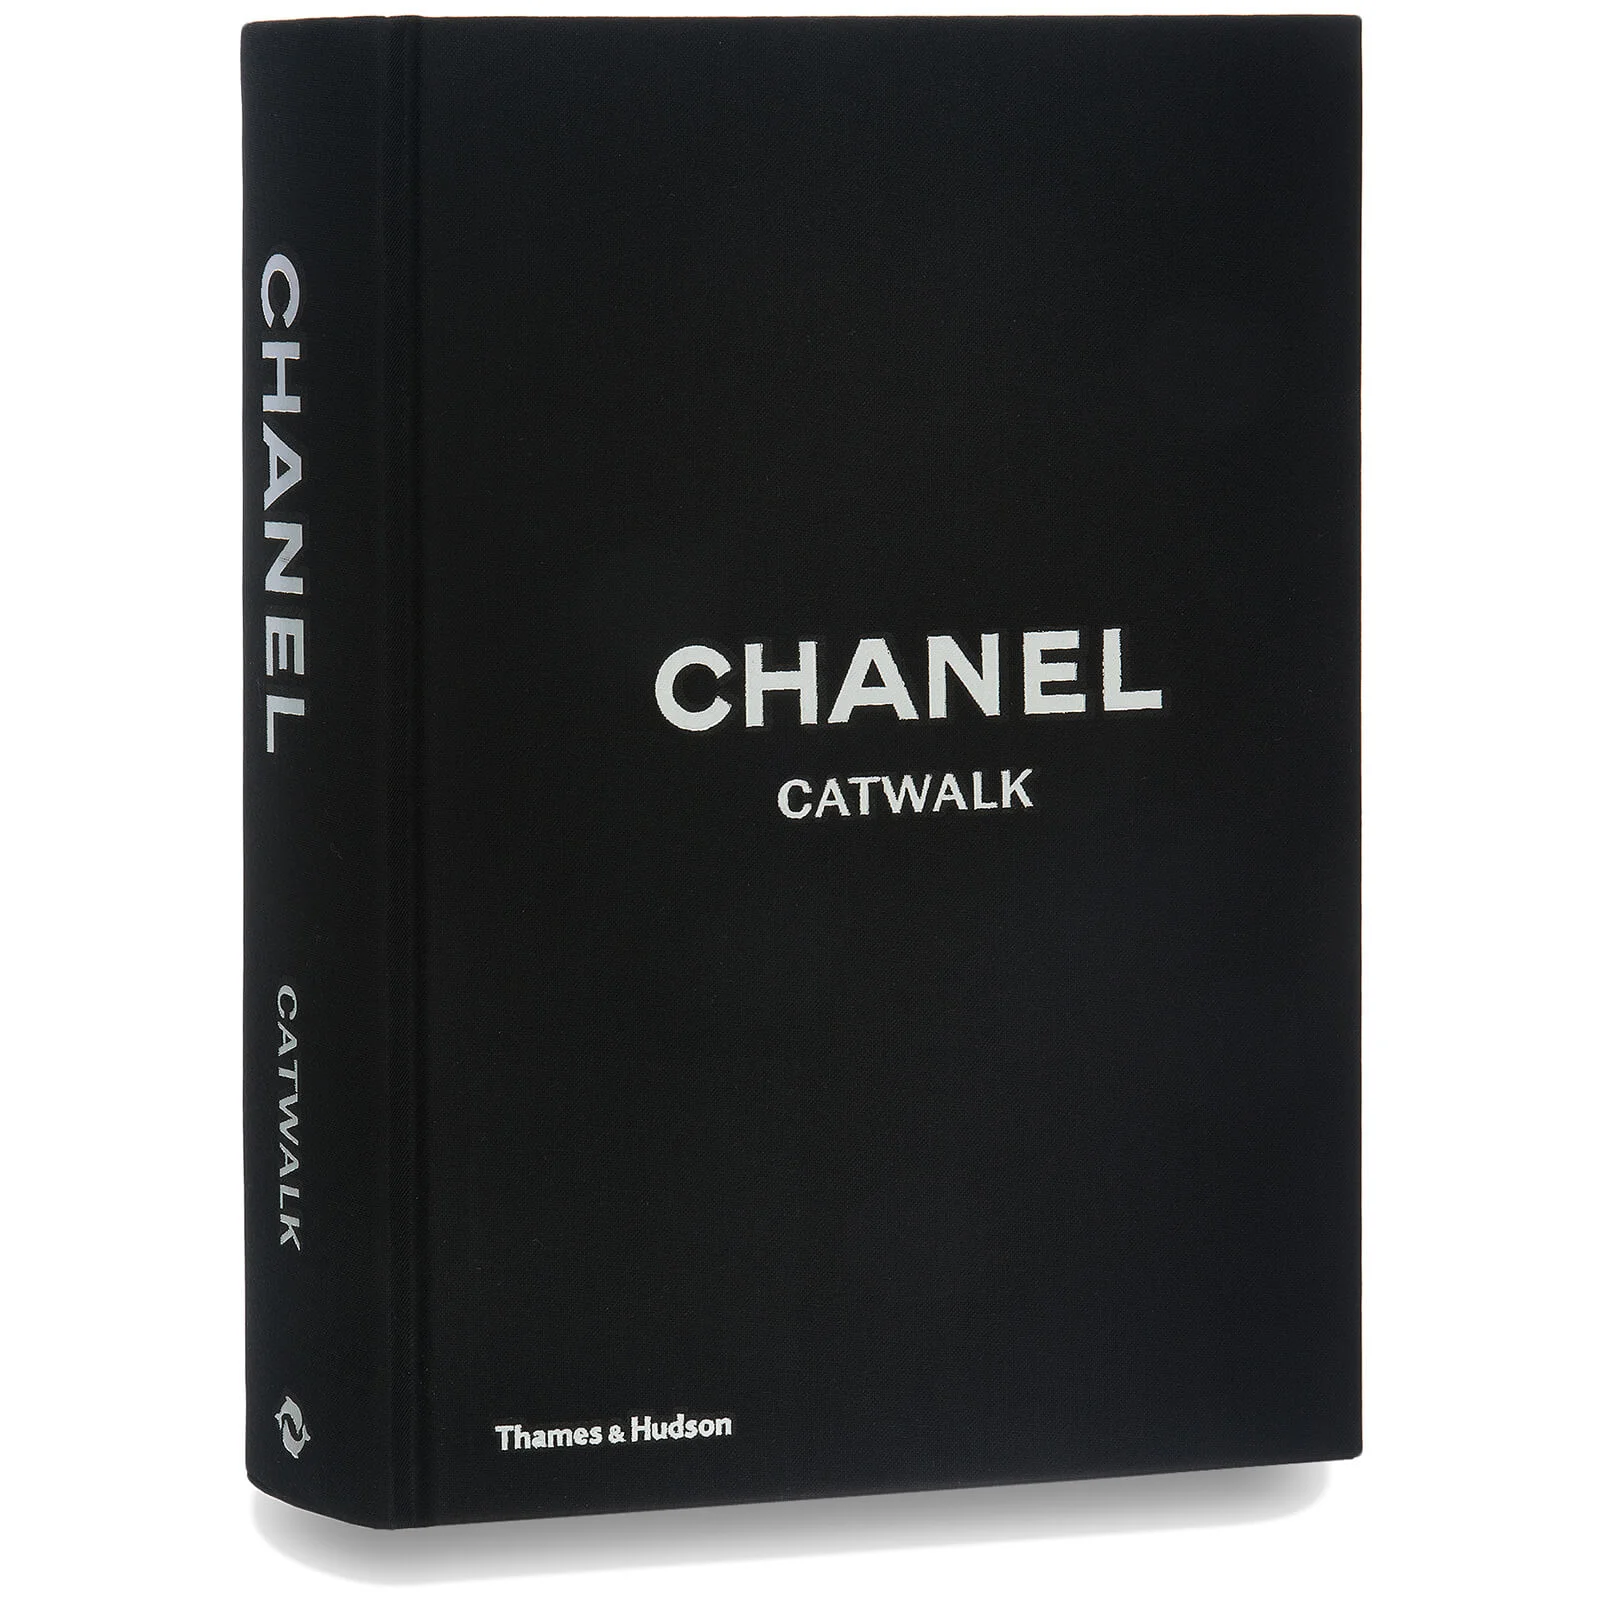 Thames and Hudson Ltd: Chanel Catwalk - The Complete Karl Lagerfeld Collections Image 1